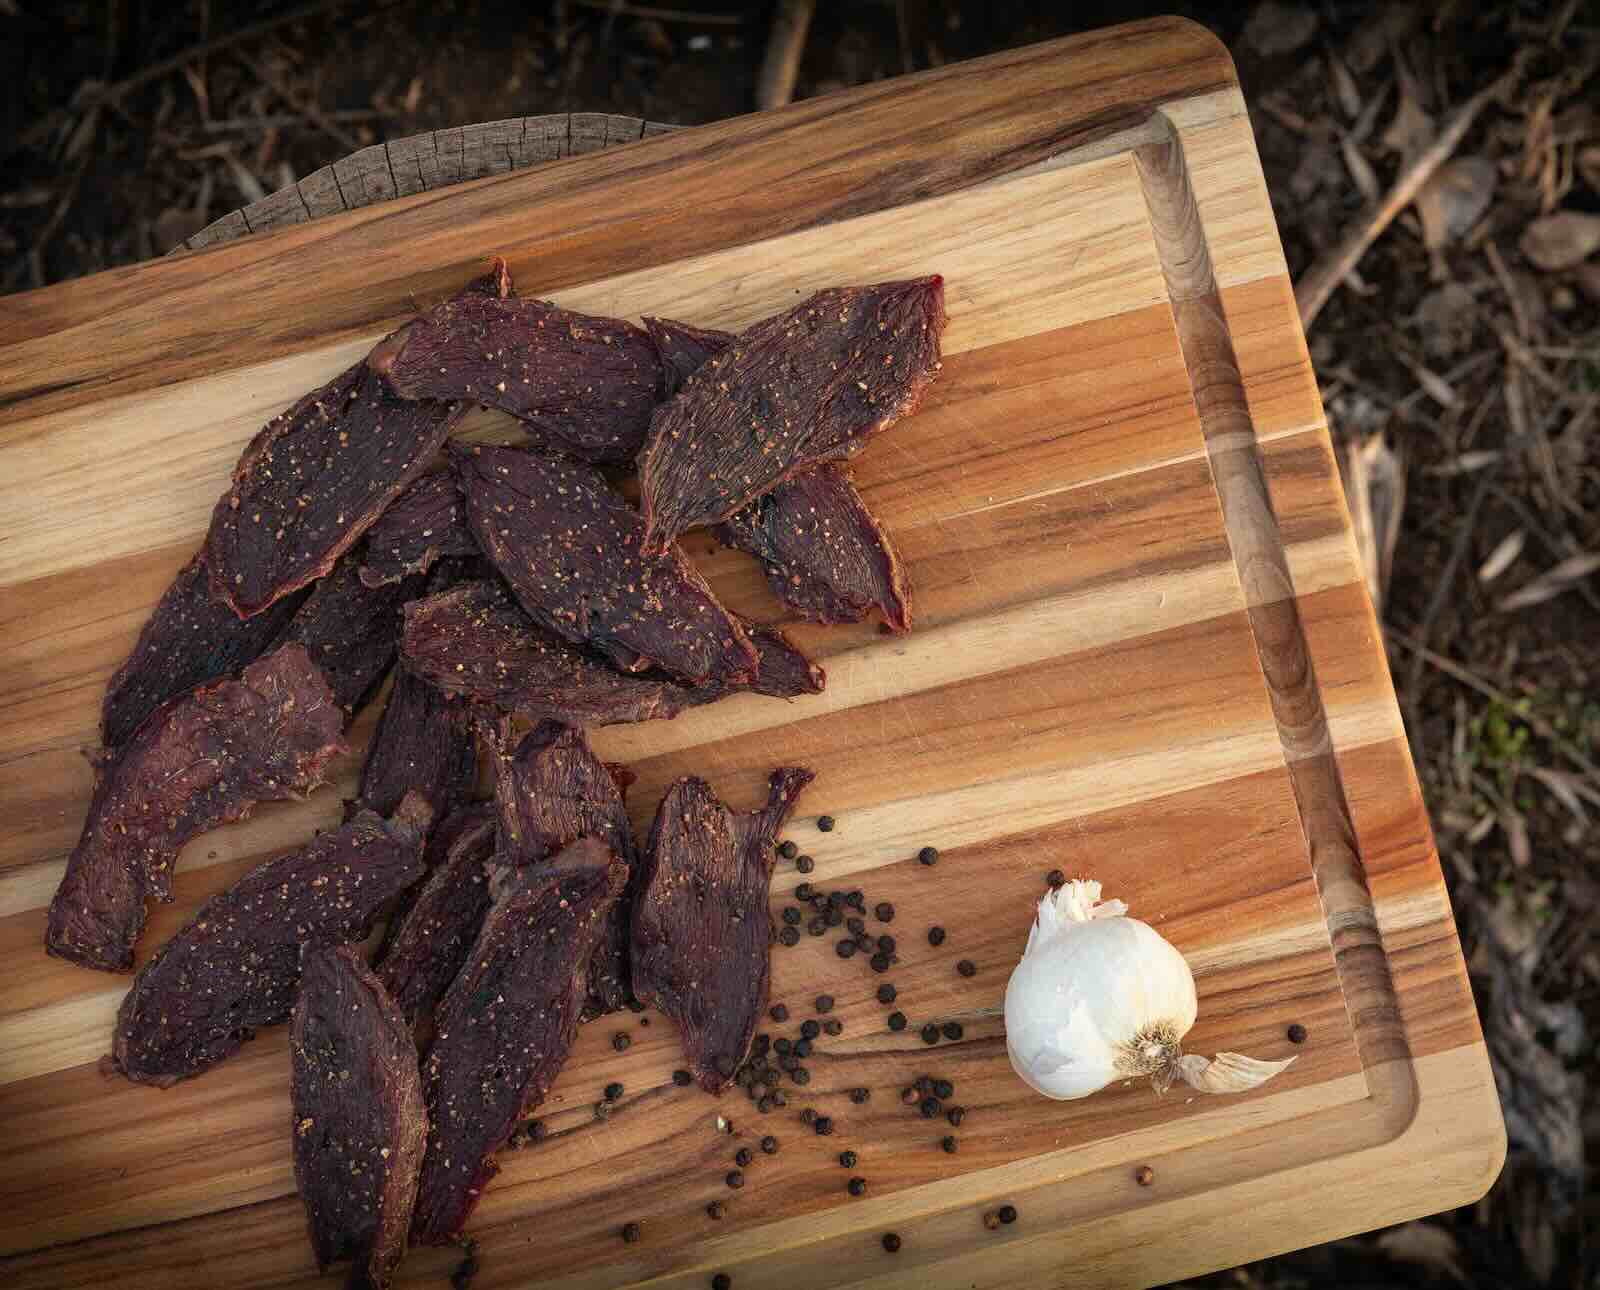 Dehydrated goose jerky on a wood cutting board with a head of garlic and black peppercorns